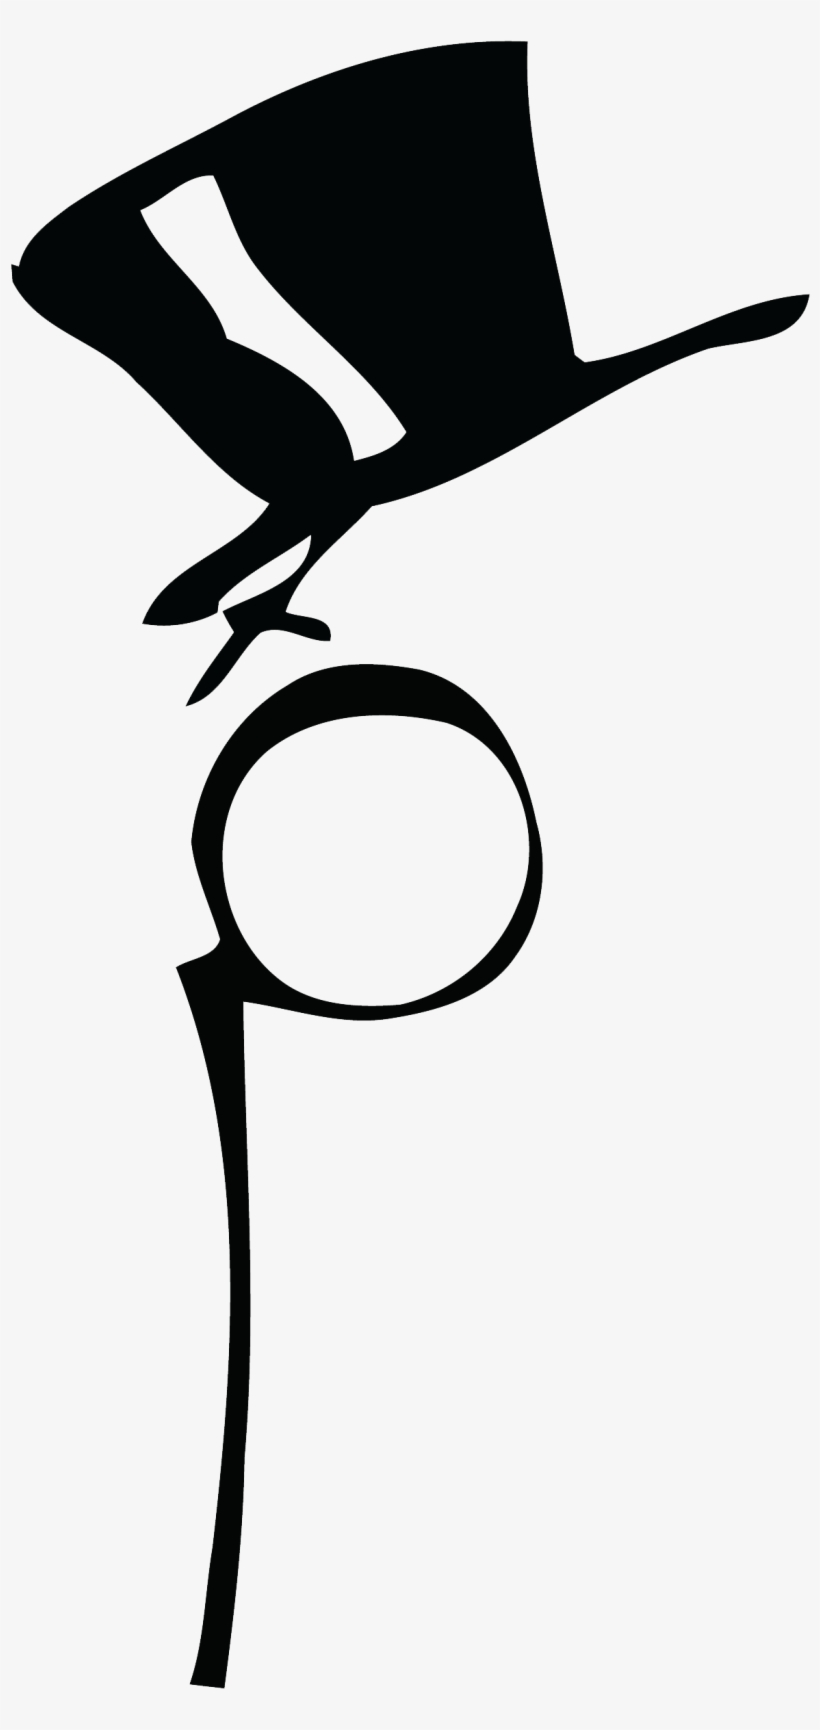 Monocle Top Hat Png Image Background - Cartoon Monocle Transparent Background, transparent png #111484